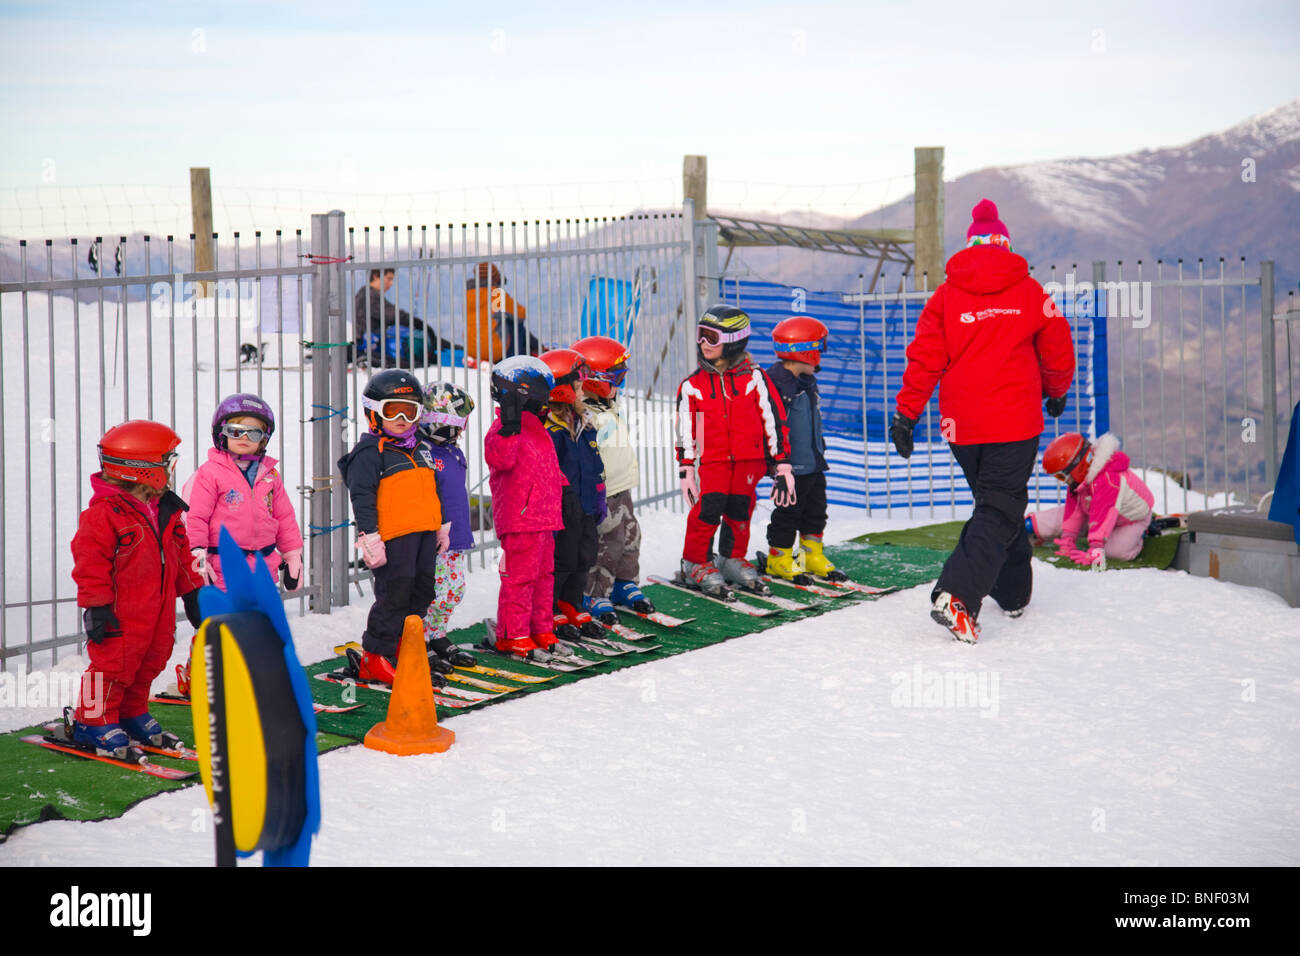 infants and children in their ski learning session at coronet peak Stock Photo